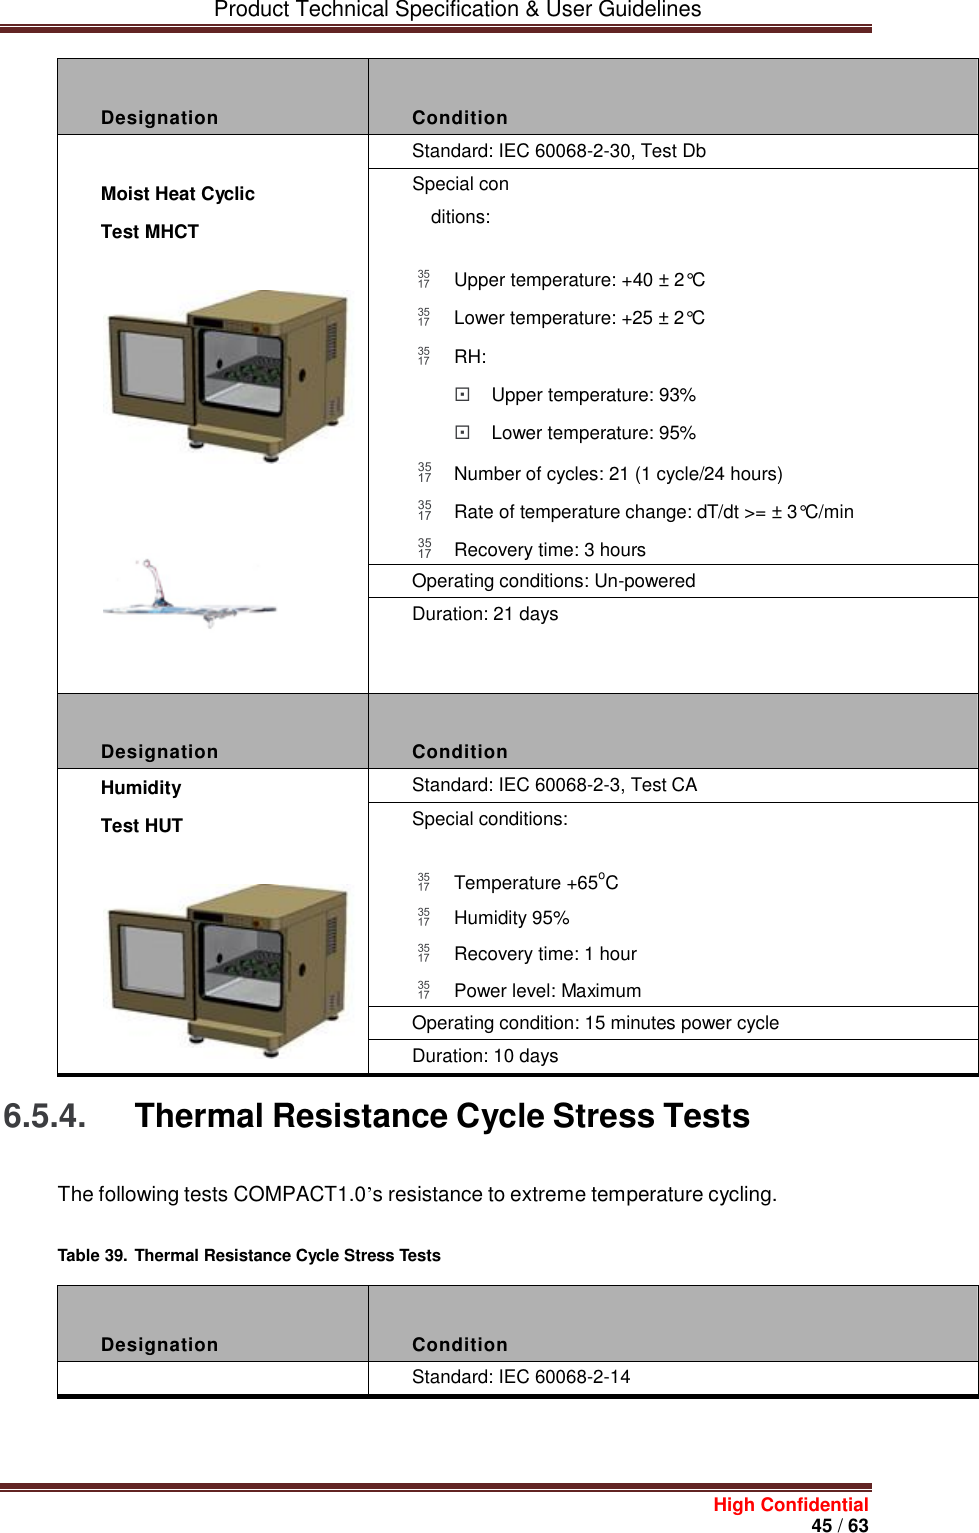         Product Technical Specification &amp; User Guidelines     High Confidential       45 / 63   Designation  Condition  Moist Heat Cyclic Test MHCT     Standard: IEC 60068-2-30, Test Db Special conditions:  Upper temperature: +40 ± 2°C  Lower temperature: +25 ± 2°C  RH:  Upper temperature: 93%  Lower temperature: 95%  Number of cycles: 21 (1 cycle/24 hours)  Rate of temperature change: dT/dt &gt;= ± 3°C/min  Recovery time: 3 hours Operating conditions: Un-powered Duration: 21 days  Designation  Condition Humidity Test HUT  Standard: IEC 60068-2-3, Test CA Special conditions:  Temperature +65oC  Humidity 95%  Recovery time: 1 hour  Power level: Maximum Operating condition: 15 minutes power cycle Duration: 10 days 6.5.4. Thermal Resistance Cycle Stress Tests The following tests COMPACT1.0’s resistance to extreme temperature cycling. Table 39. Thermal Resistance Cycle Stress Tests    Designation  Condition  Standard: IEC 60068-2-14 